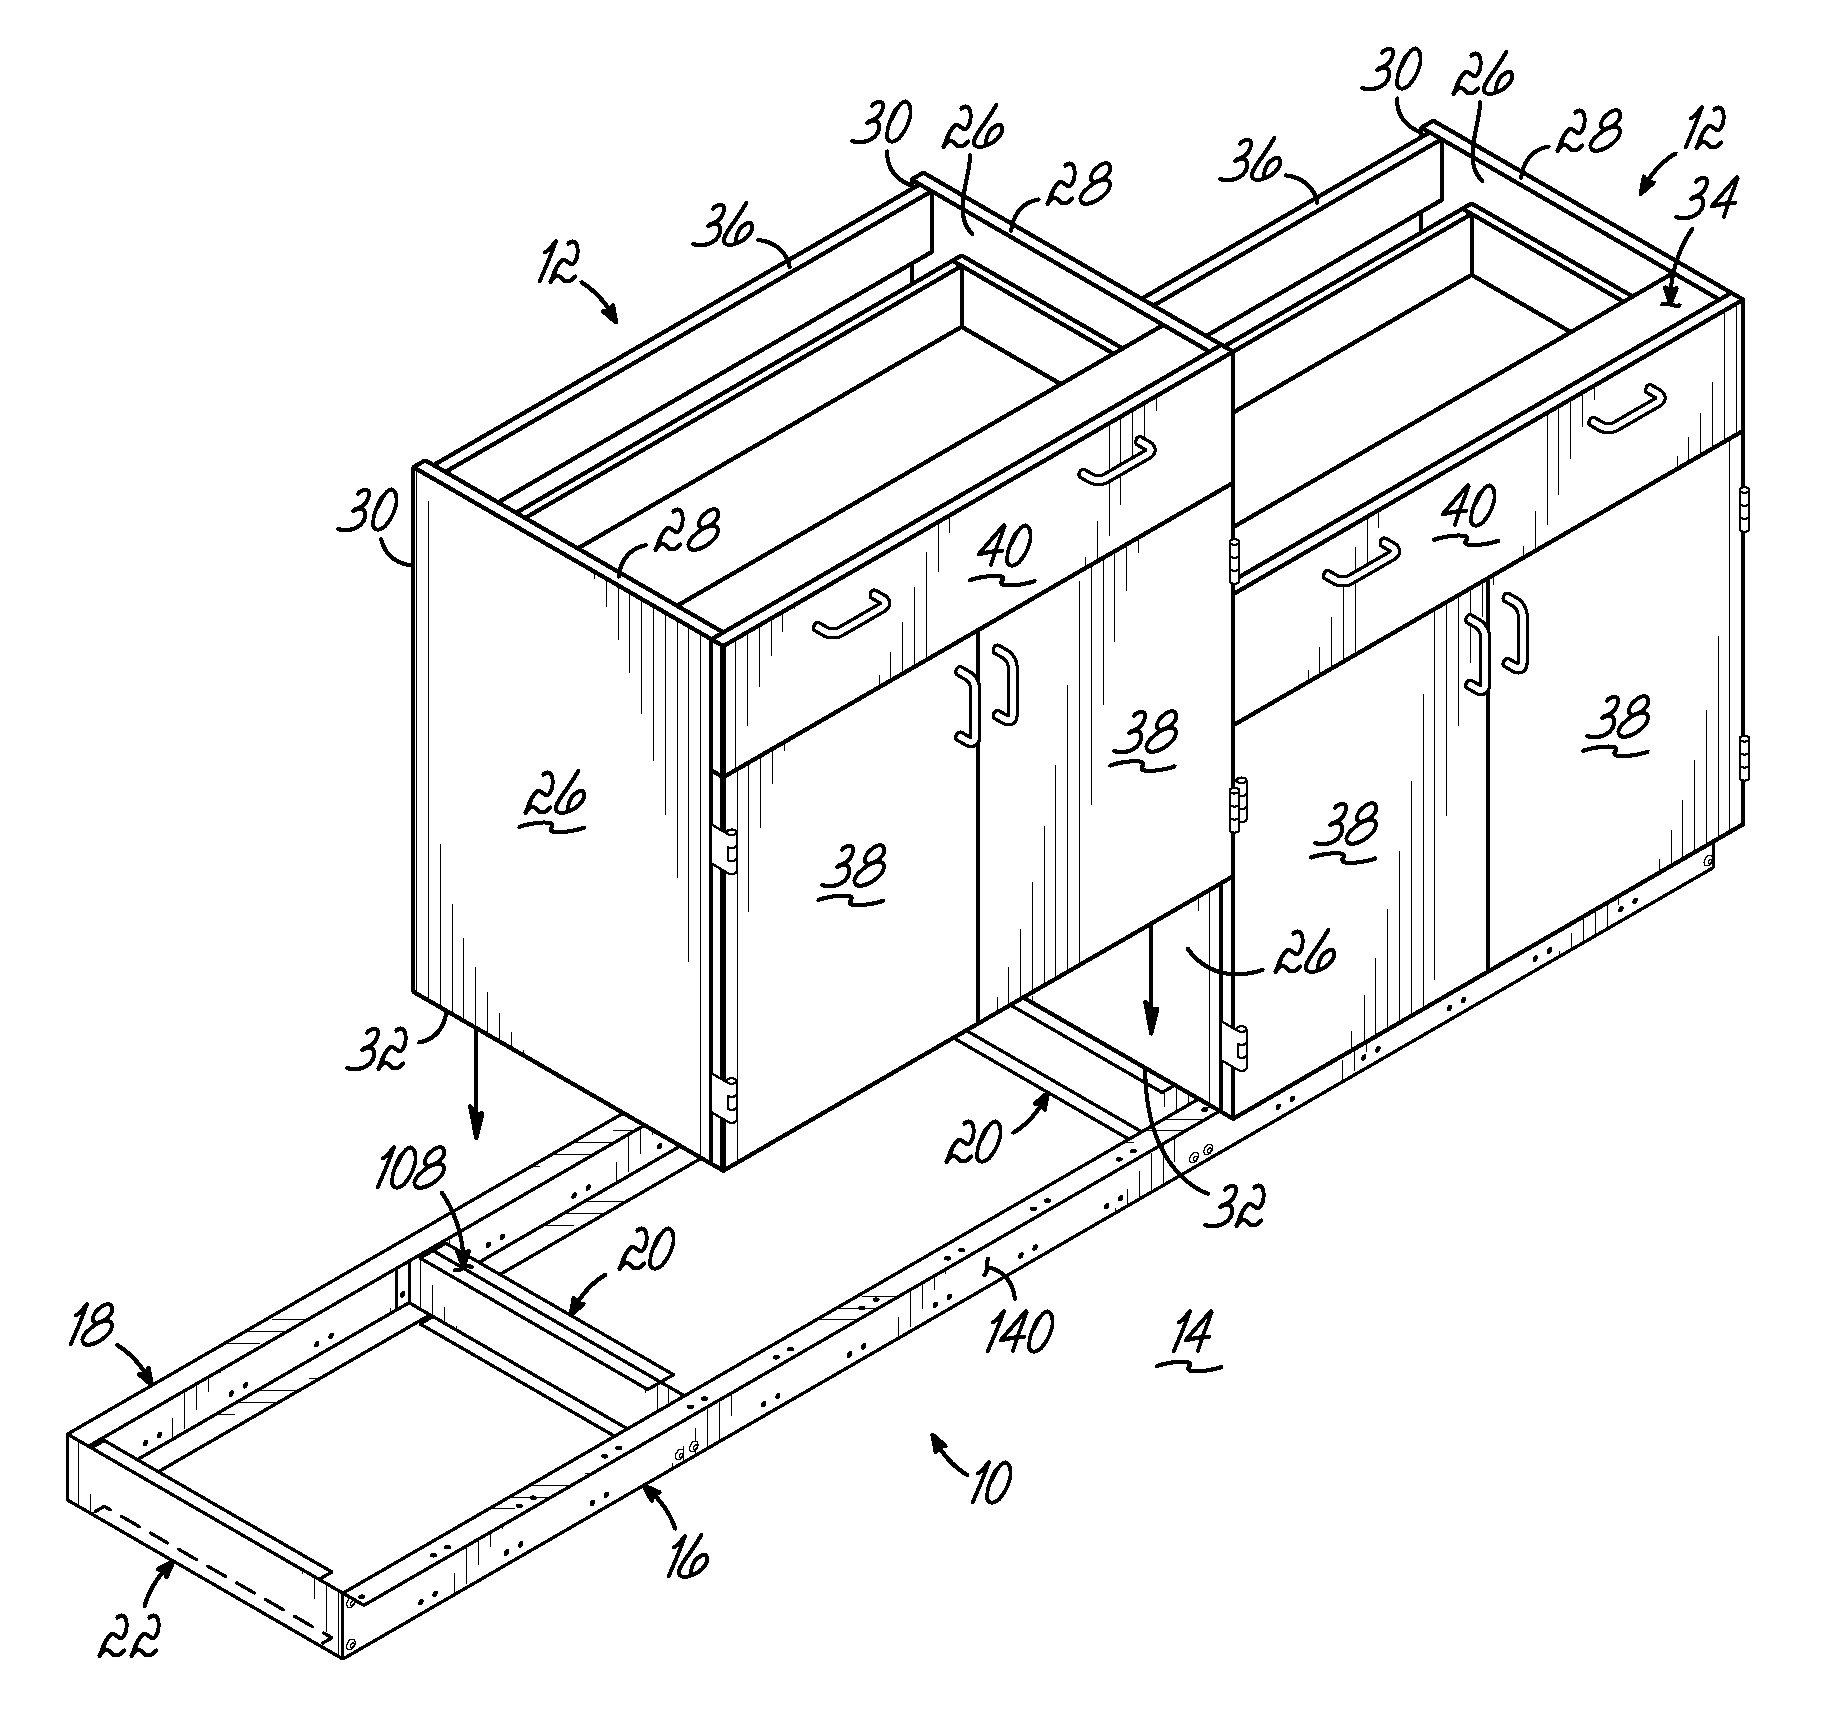 Platform assembly for supporting cabinets